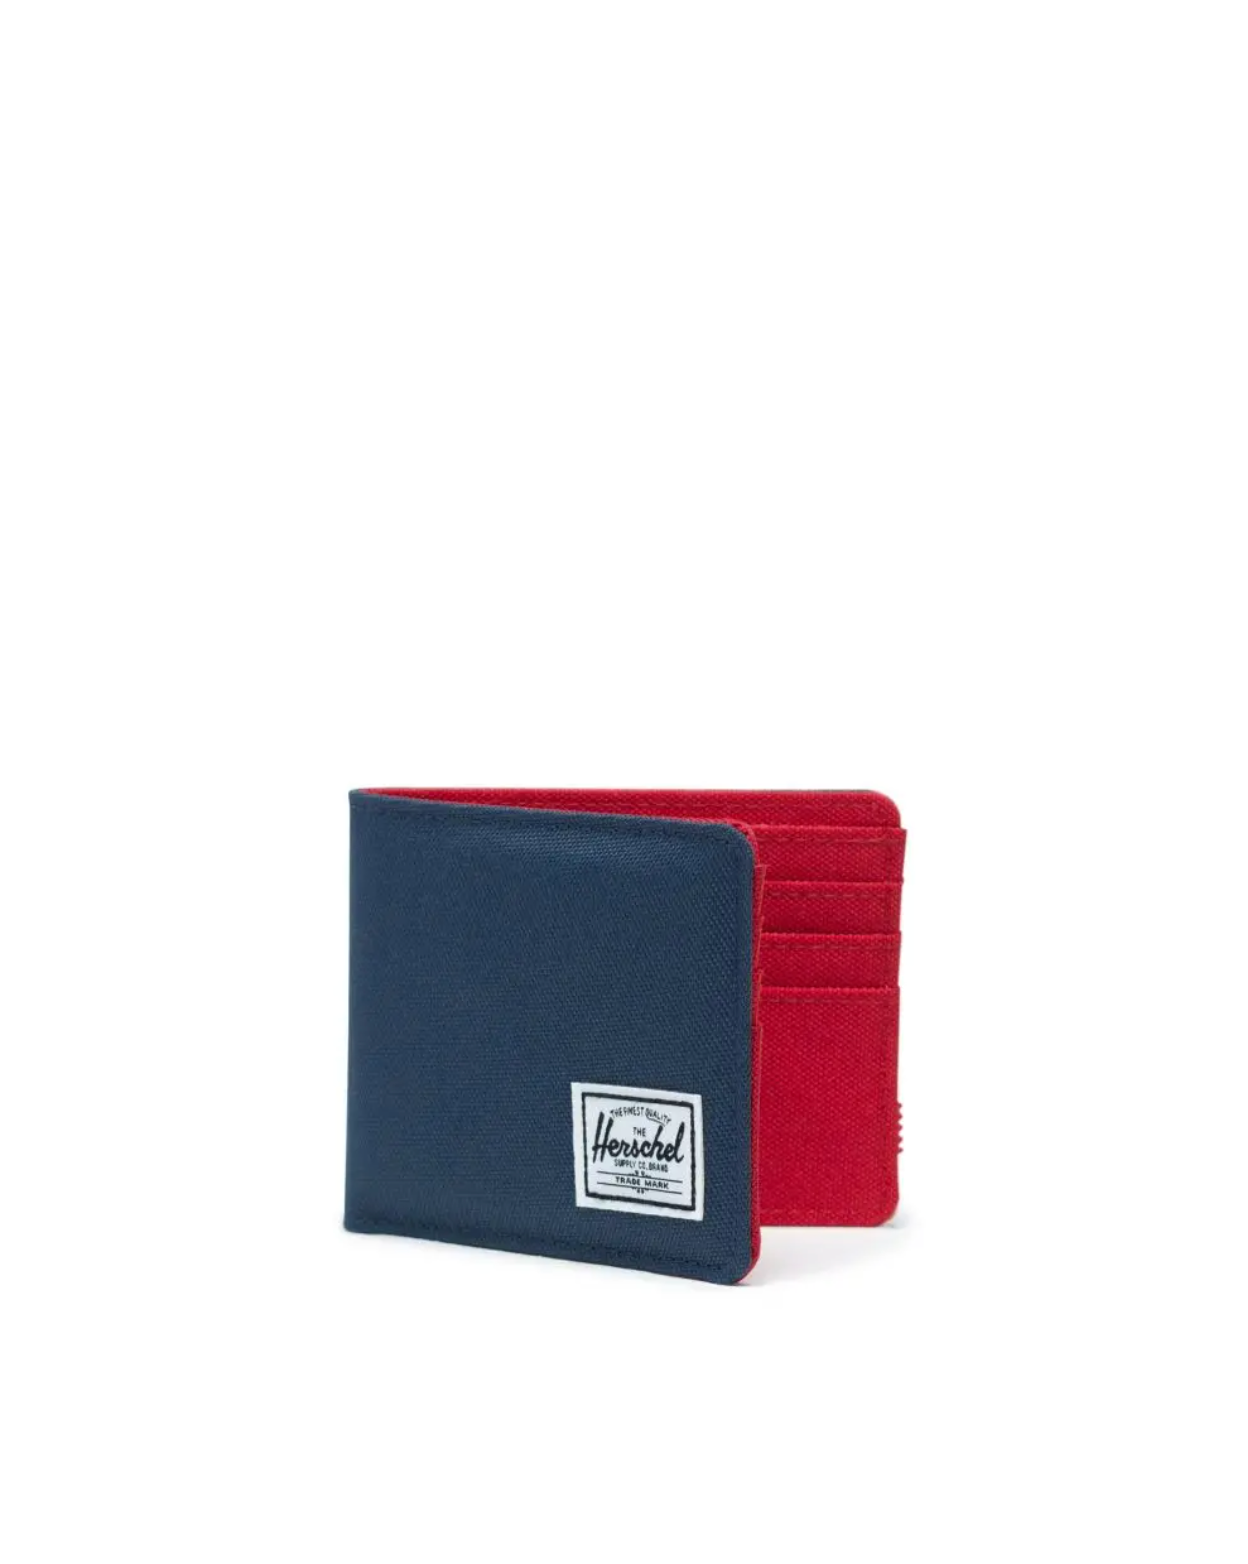 Navy and red wallet